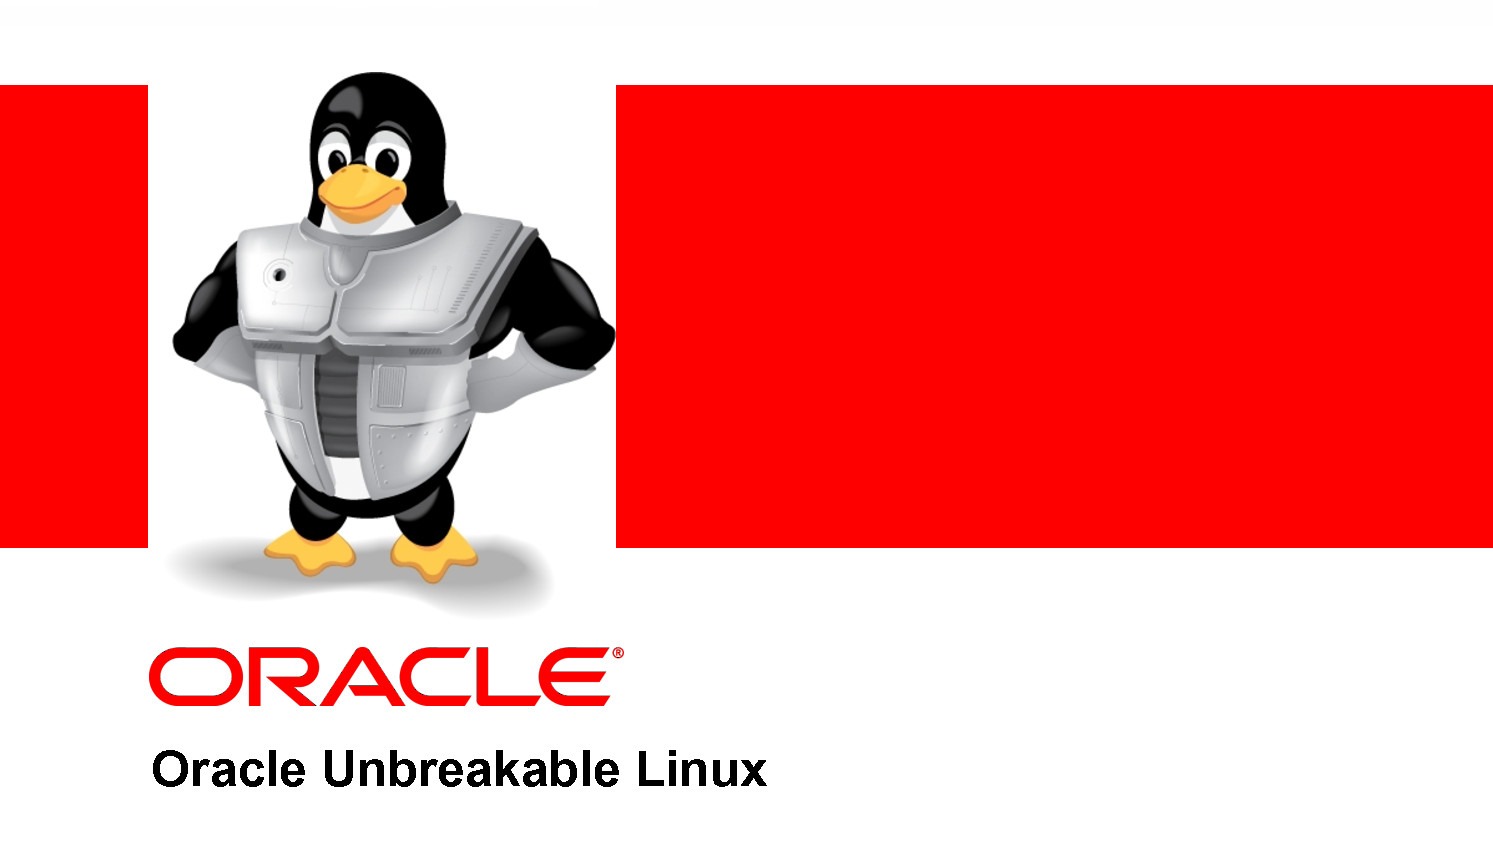 Oracle supporta BTRFS nel suo Unbreakable Linux. Anche RAID.